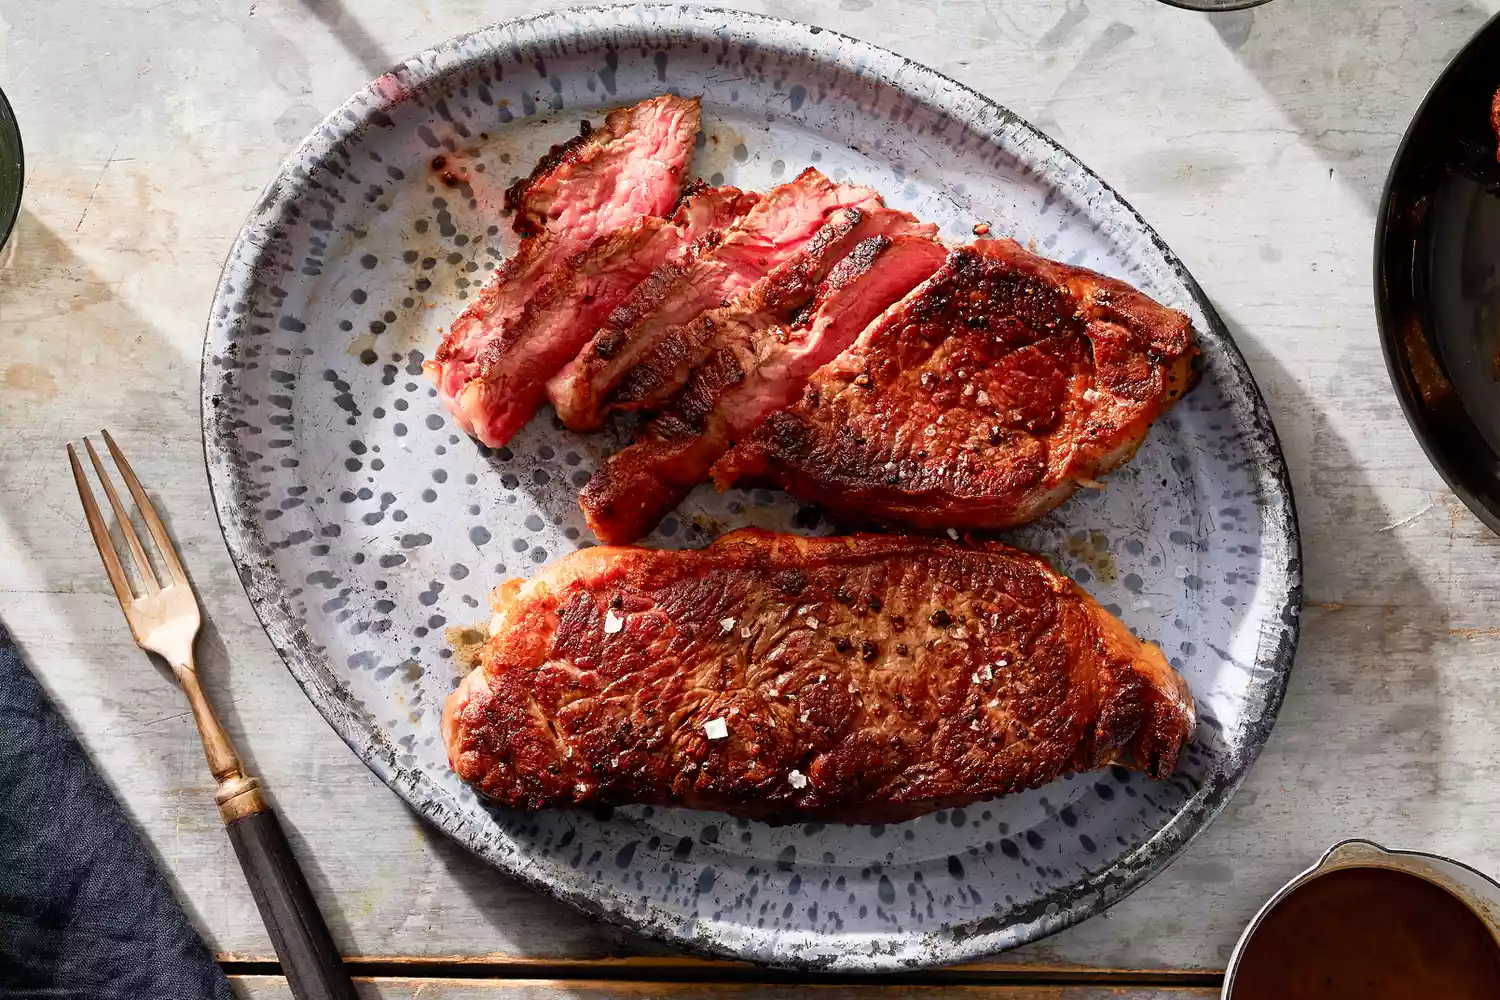 Reverse Searing Is the Secret to Cooking Restaurant-Quality Steak at Home